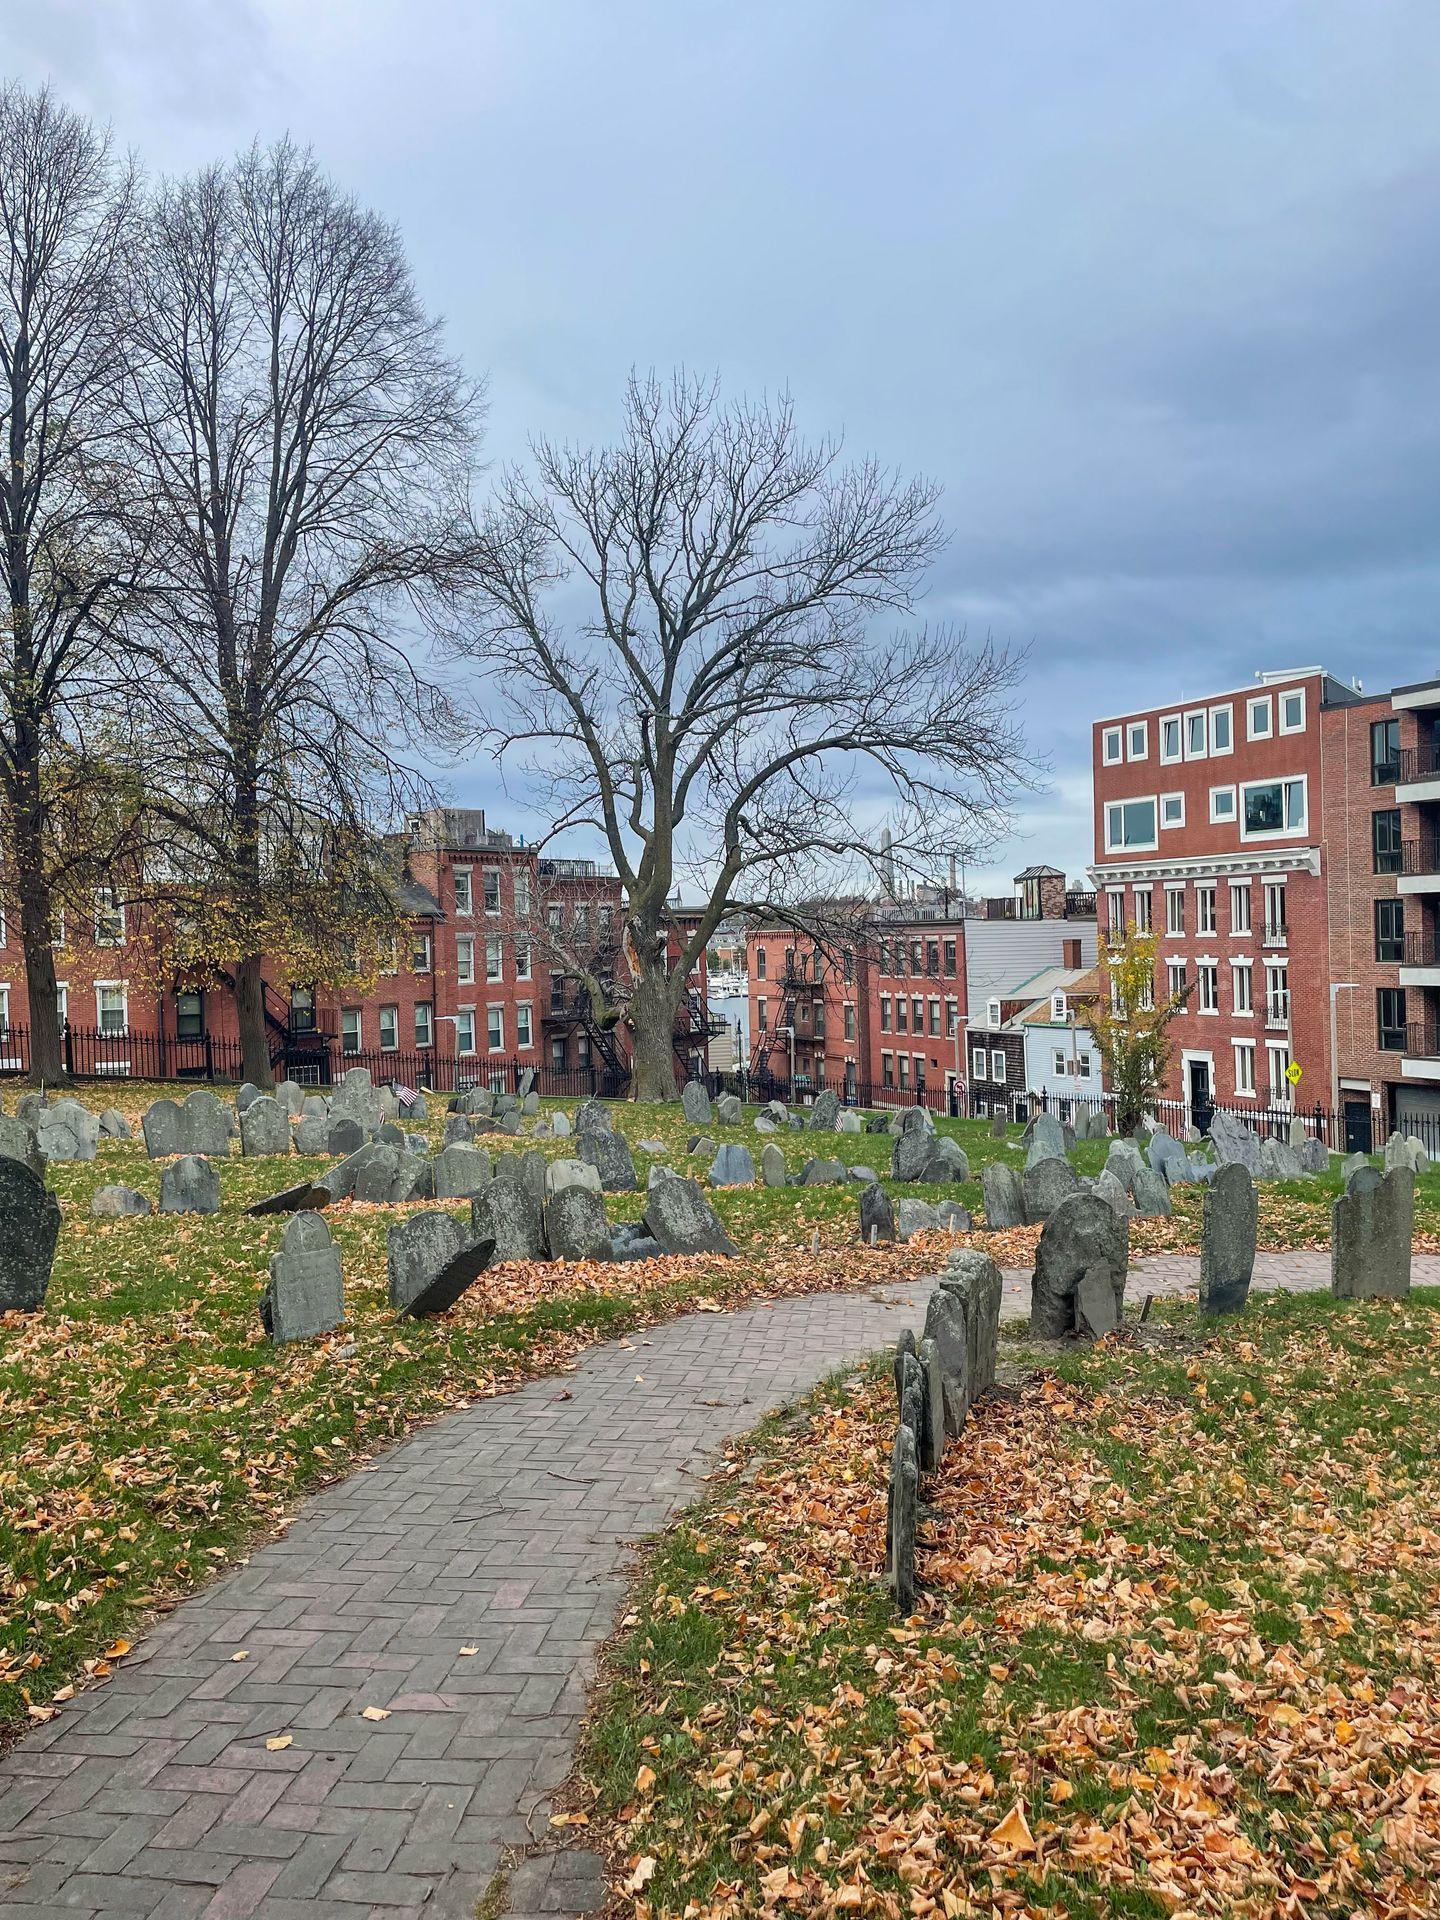 Several historic graves along a path in the Copp's Hill Burying Ground